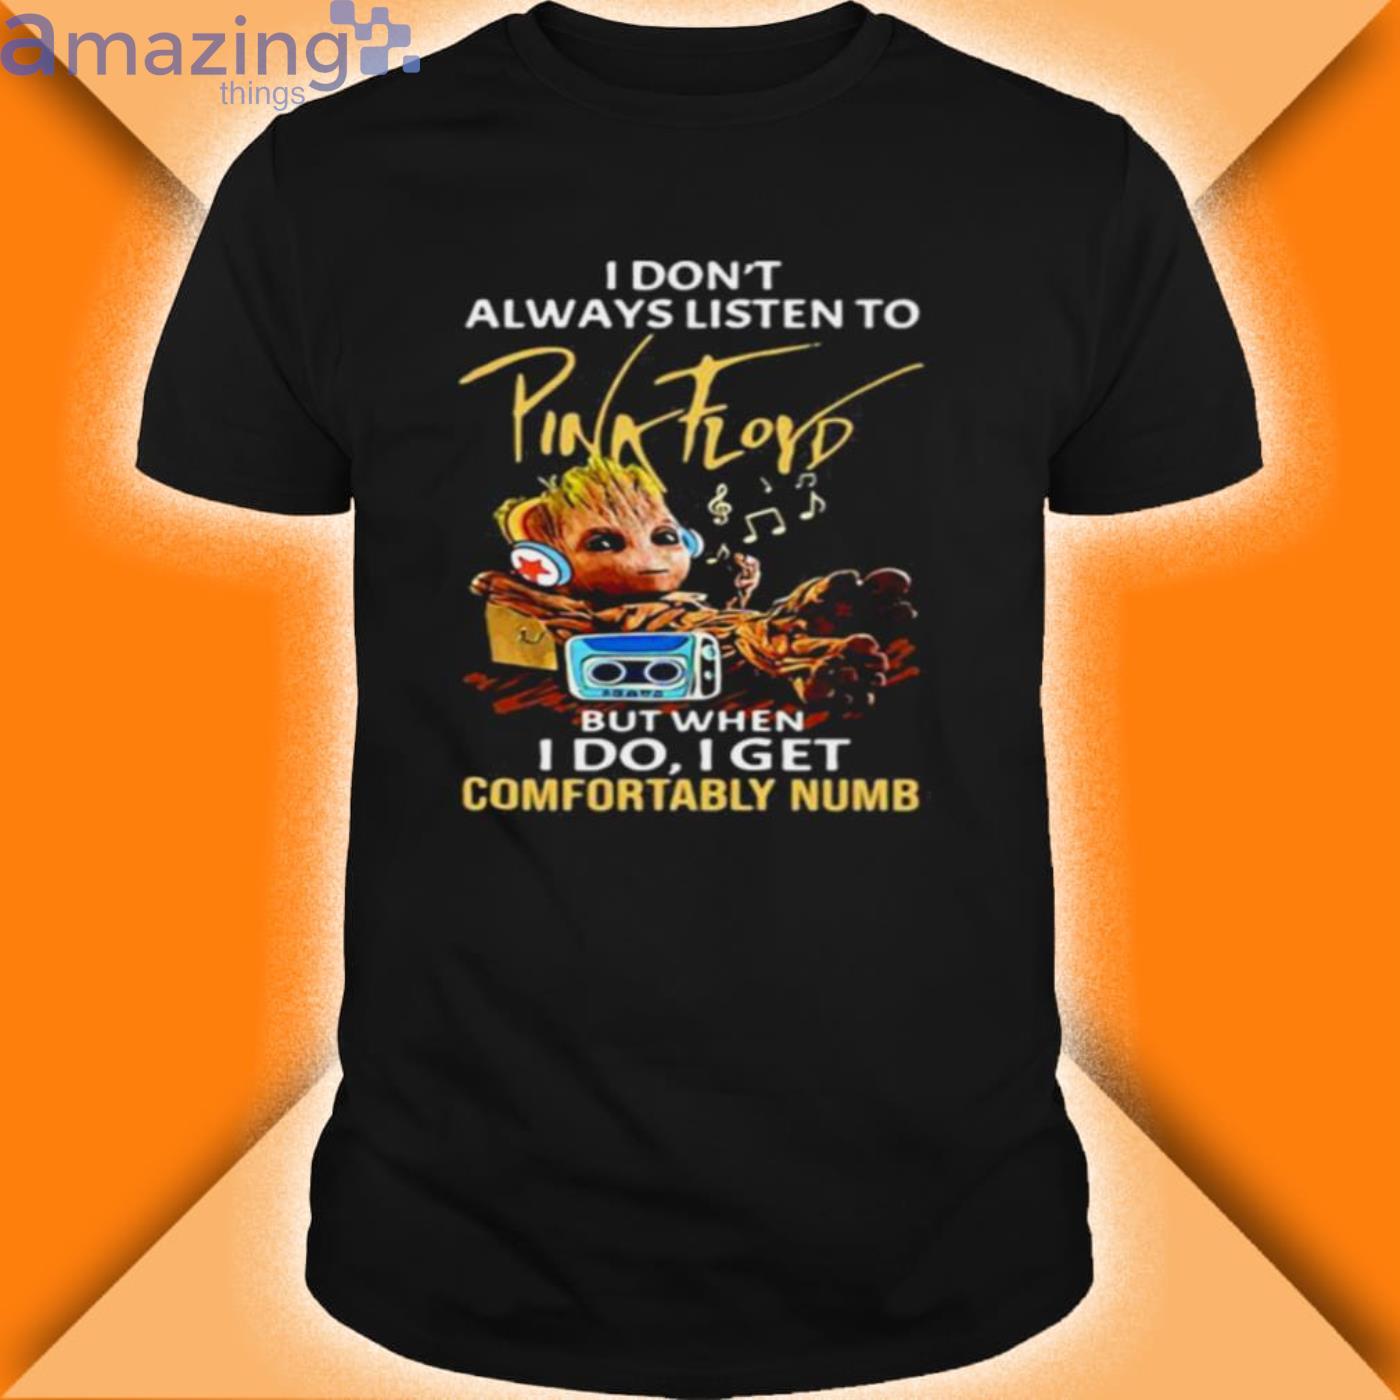 I Dont Always Listen To Pink Floyd But When I Do I Get Comfortably Numb Baby Groot Shirt Product Photo 1